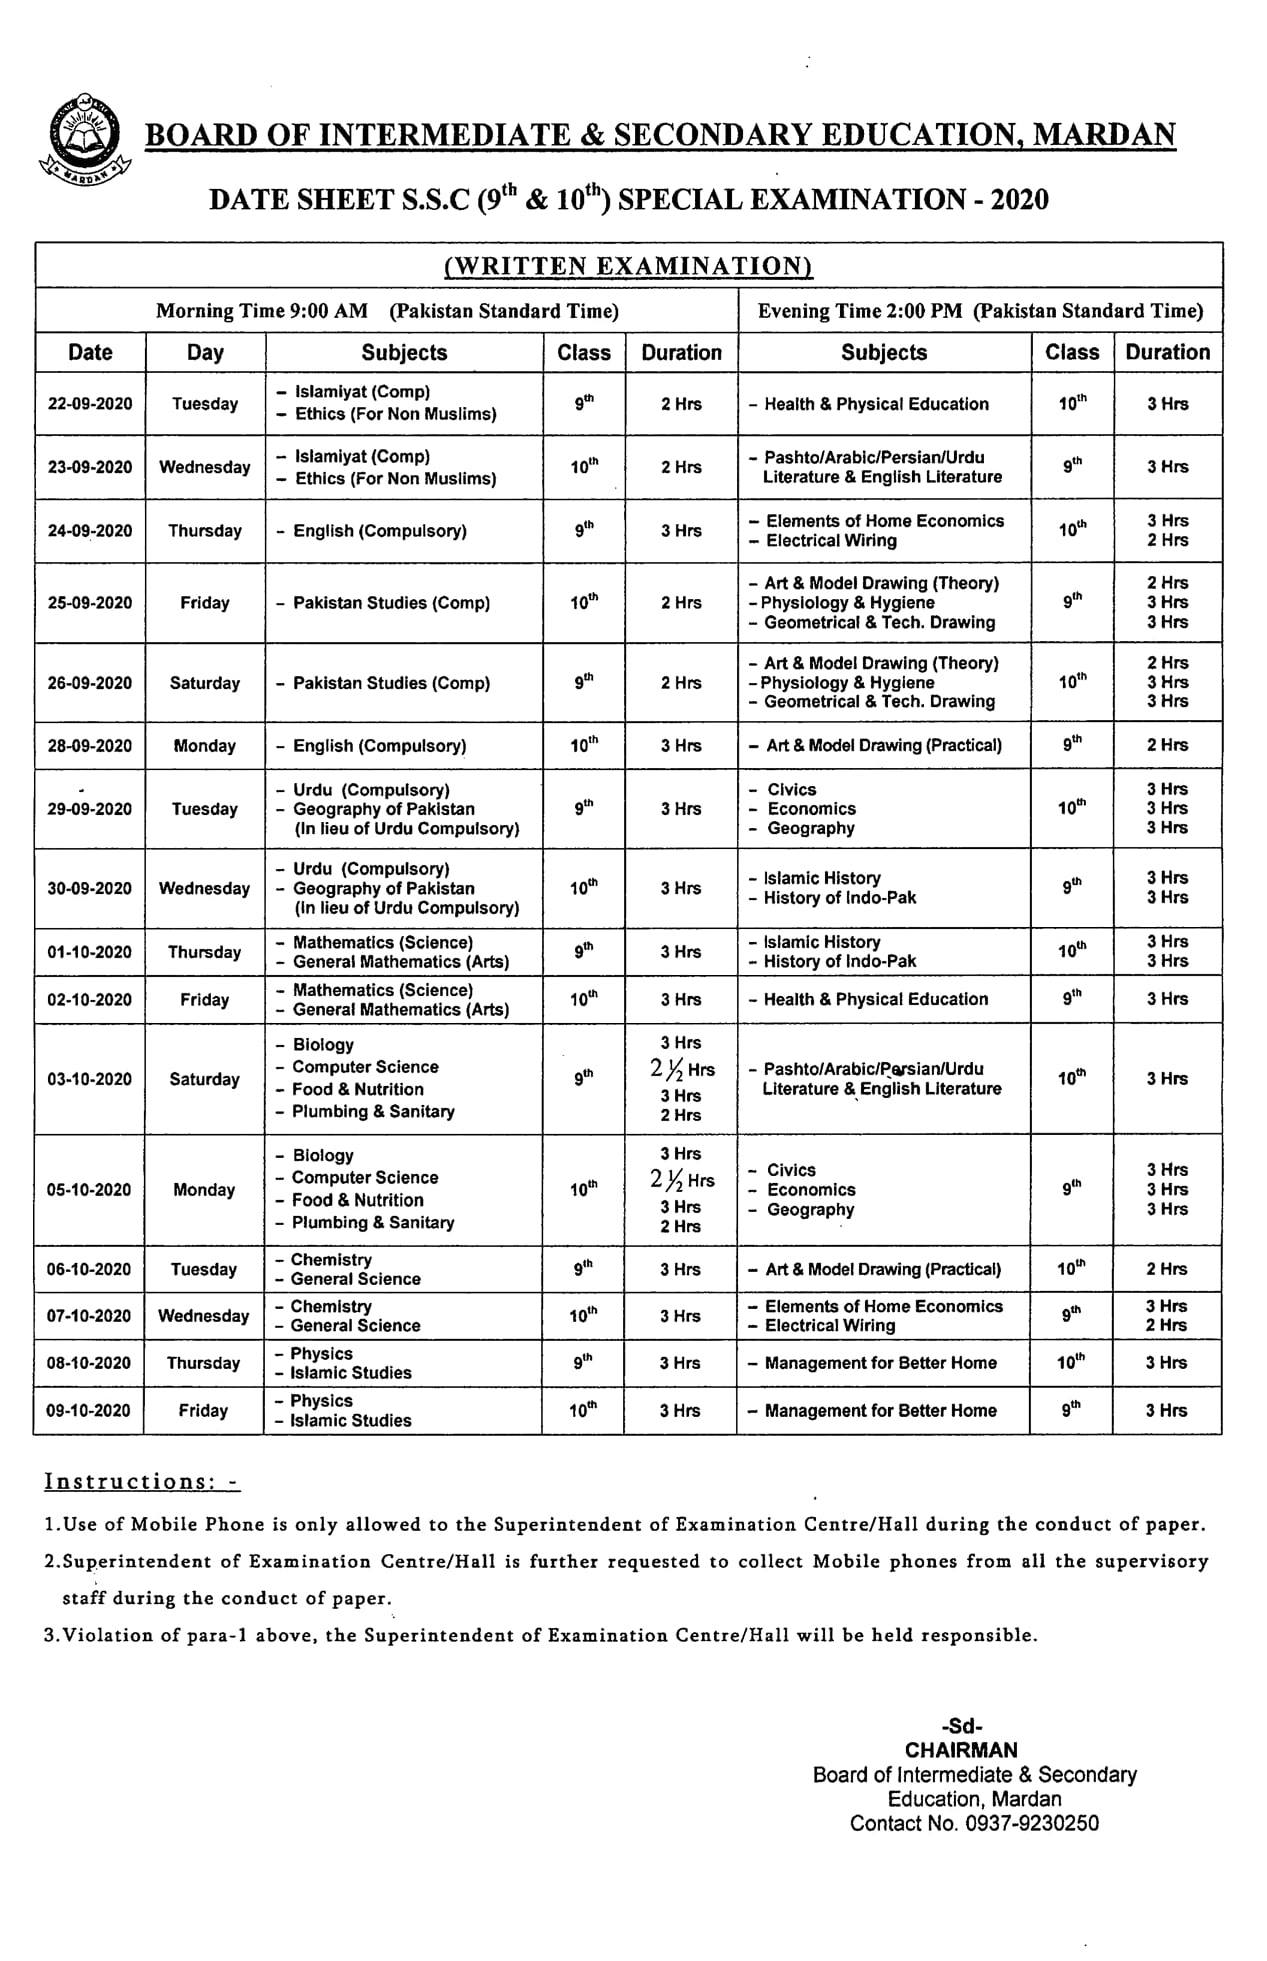 BISE Mardan Date Sheet Special Annual Exam 2020